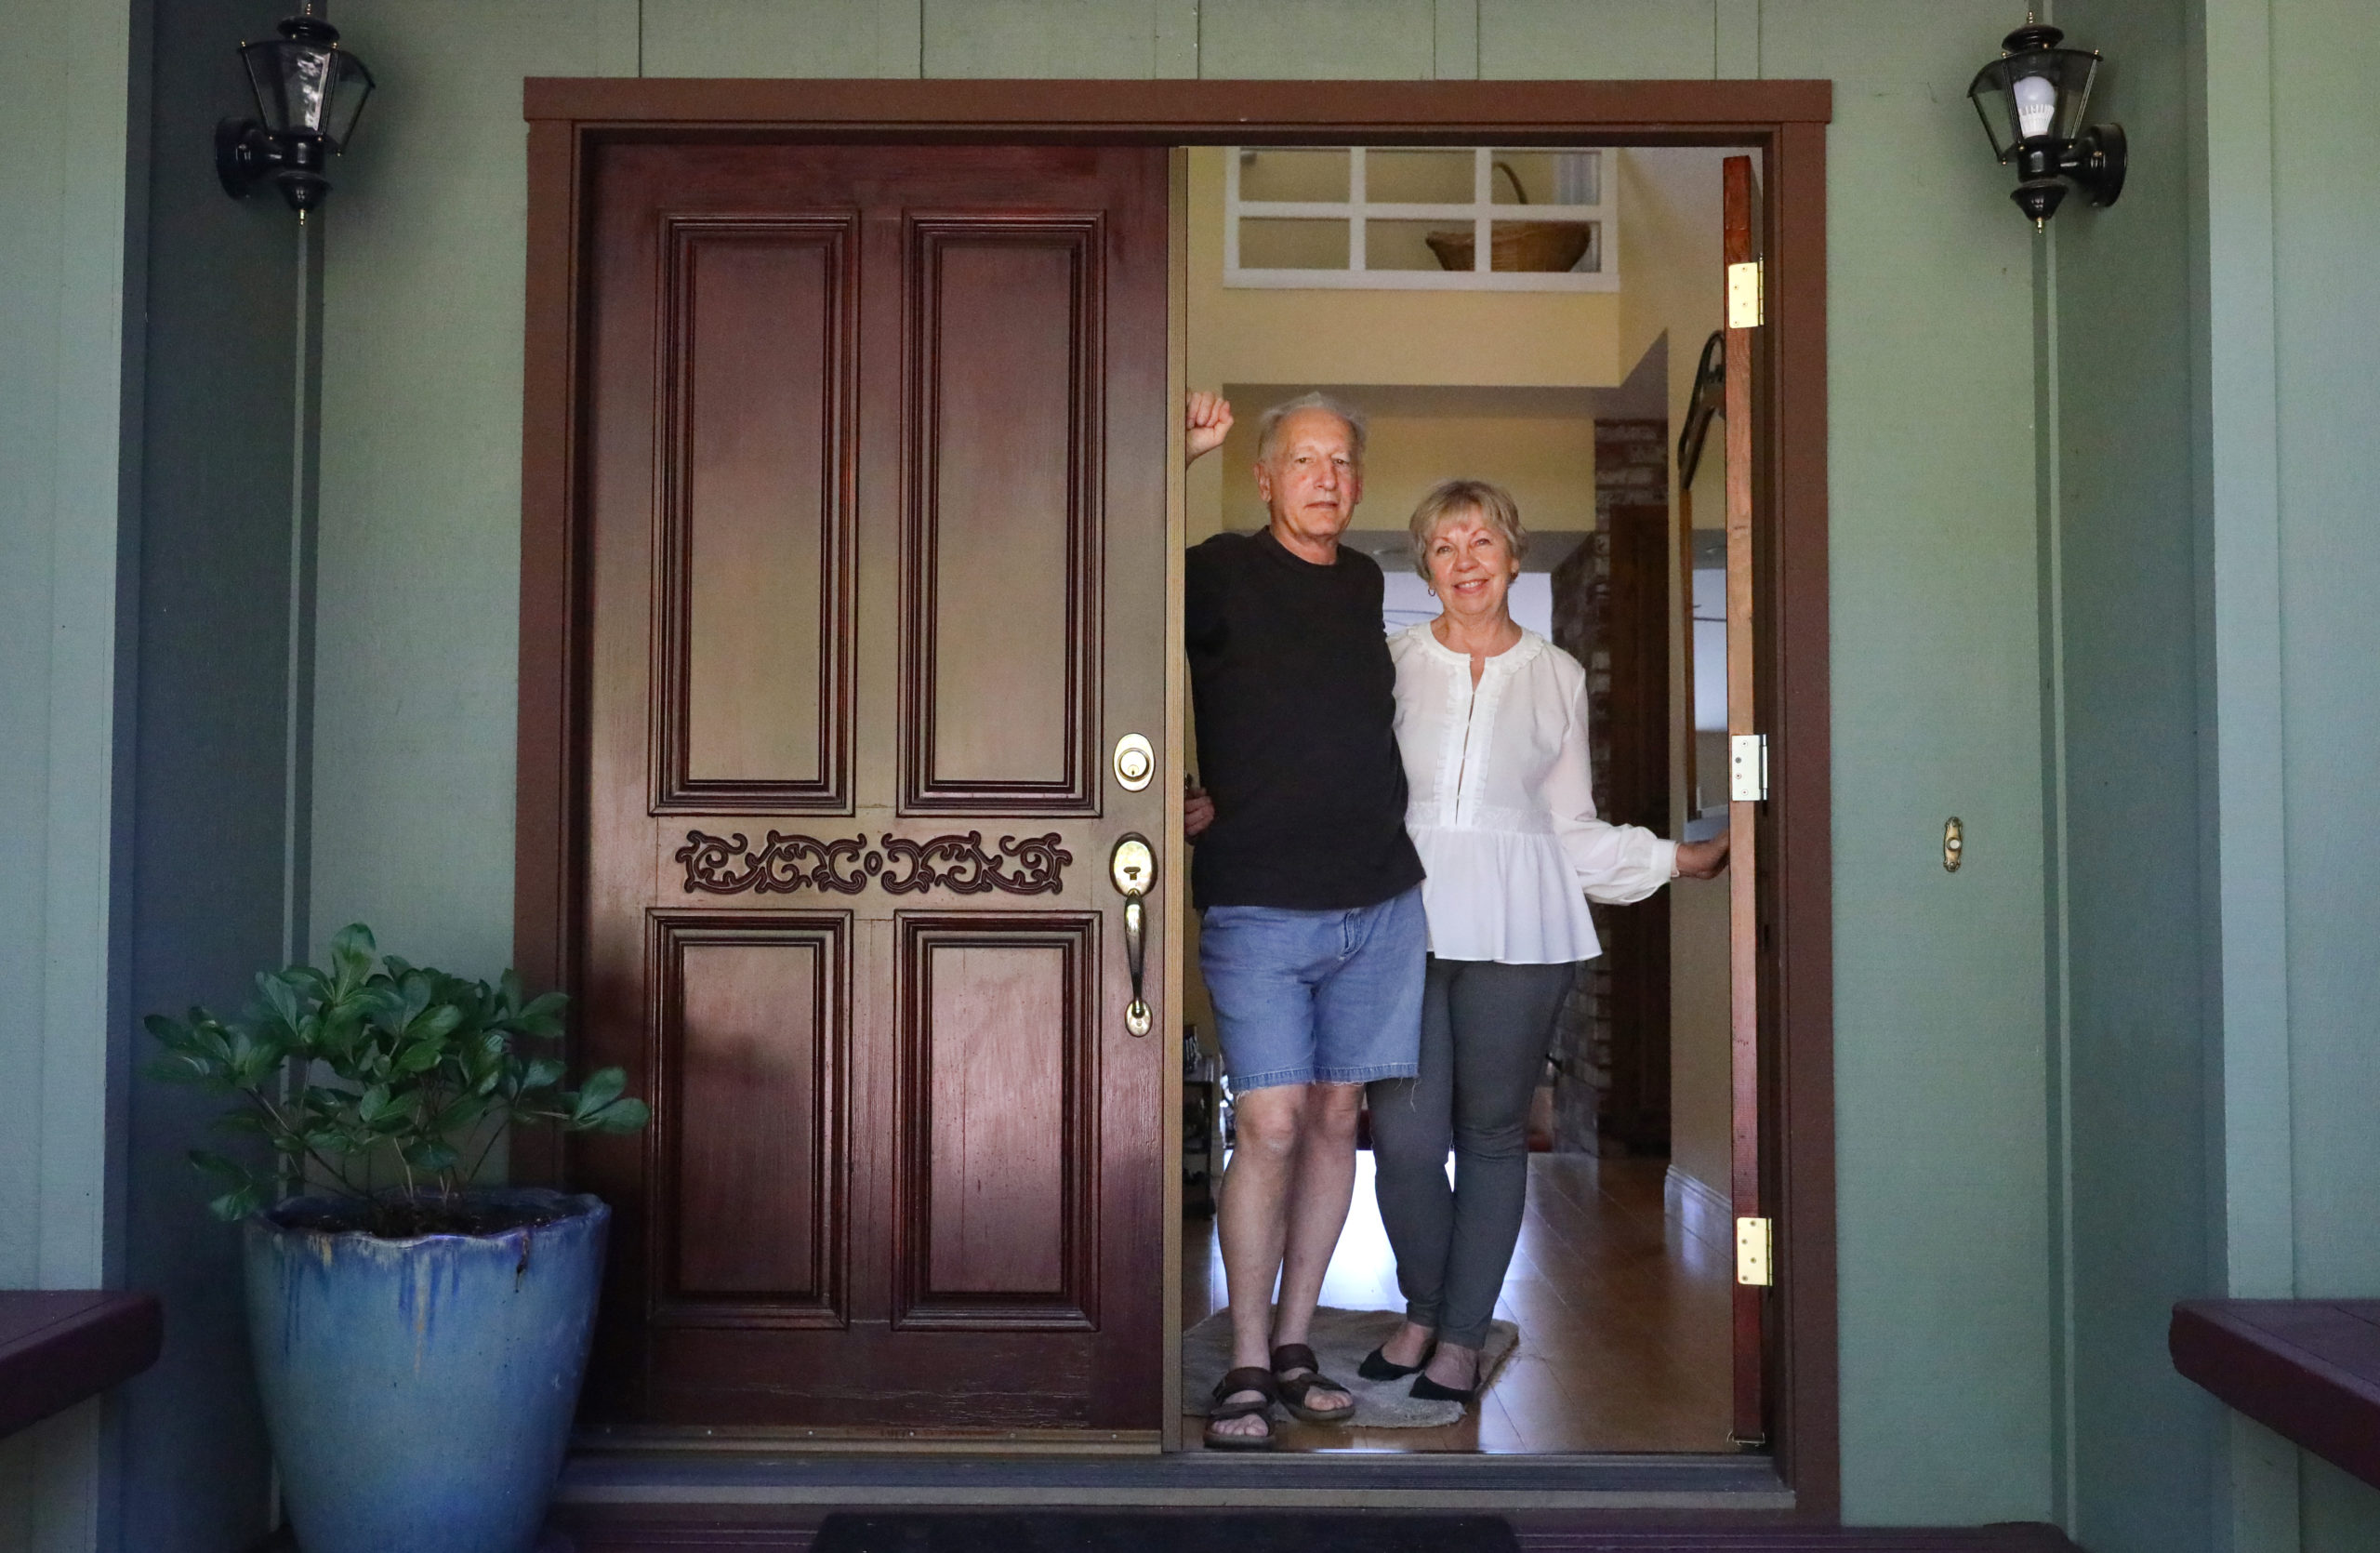 Rich Steiner and Jan Cregan are selling their Santa Rosa home to move to Tennessee, due to wildfire danger and the high cost of living in Sonoma County. Steiner has lived in Sonoma County for 46 years, and Cregan has been here for 31 years. (Christopher Chung/ The Press Democrat)